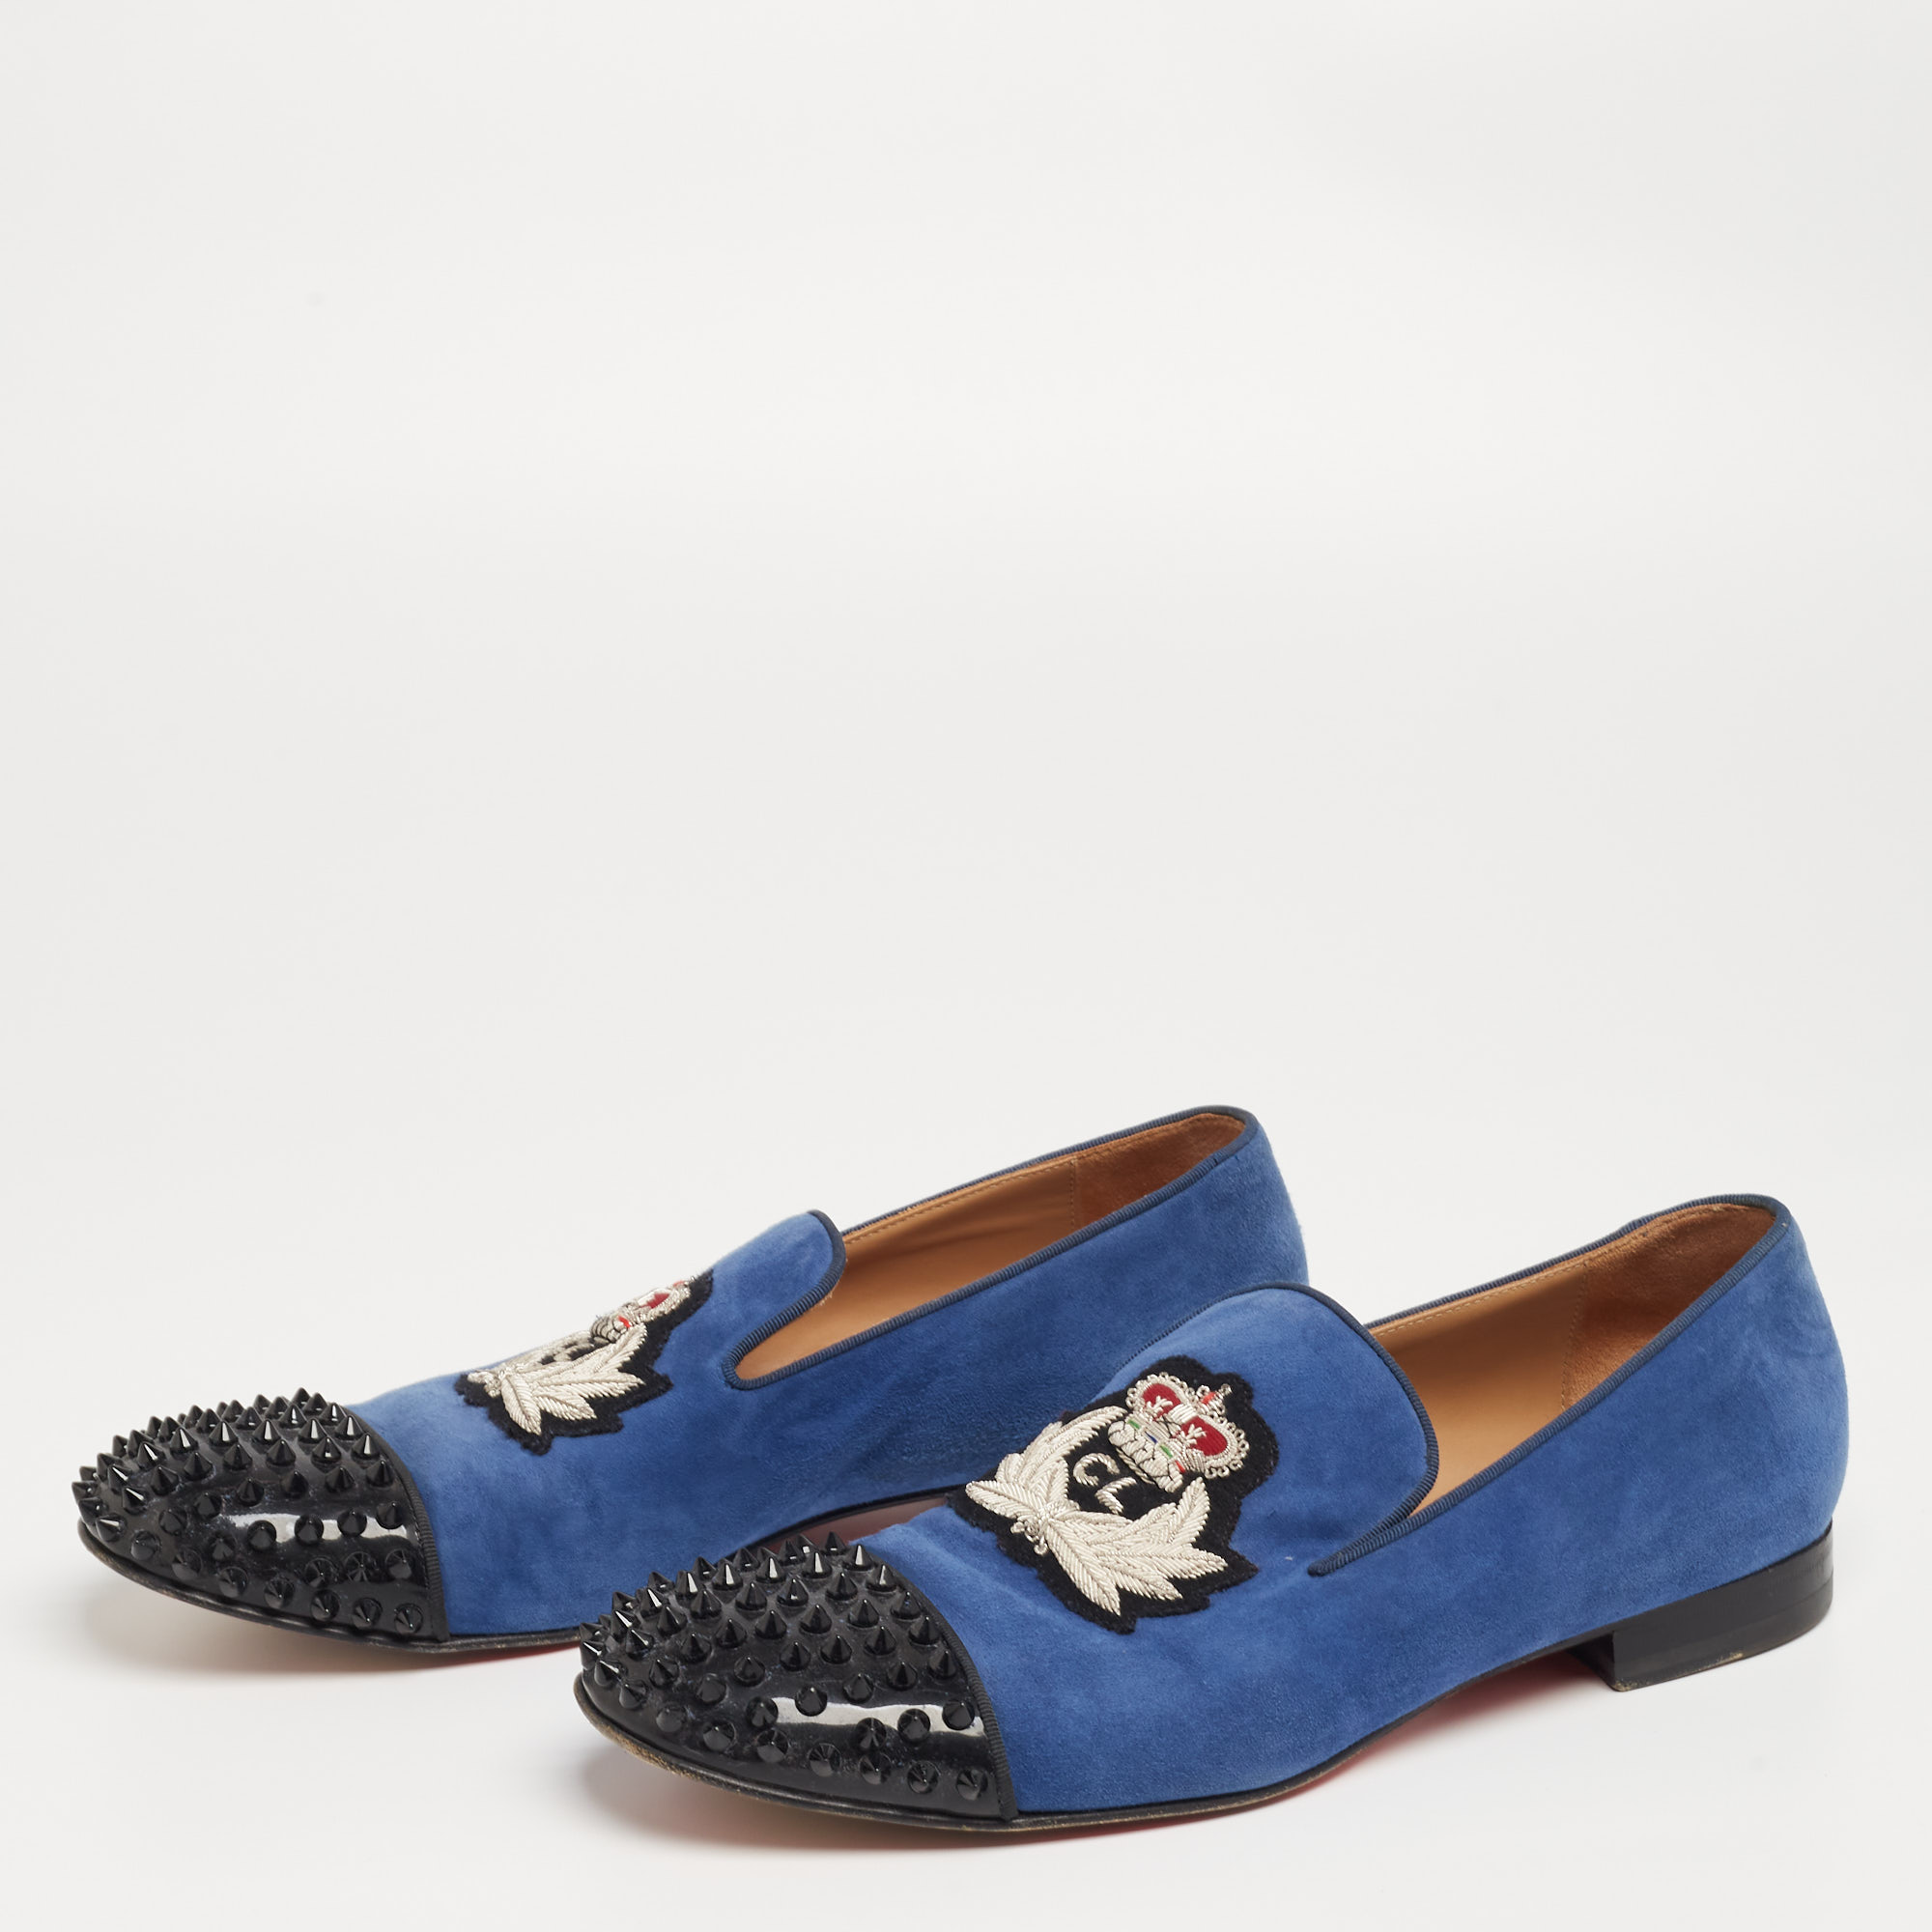 

Christian Louboutin Blue/Black Suede and Patent Leather Harvanana Spiked Cap-Toe Smoking Slippers Size